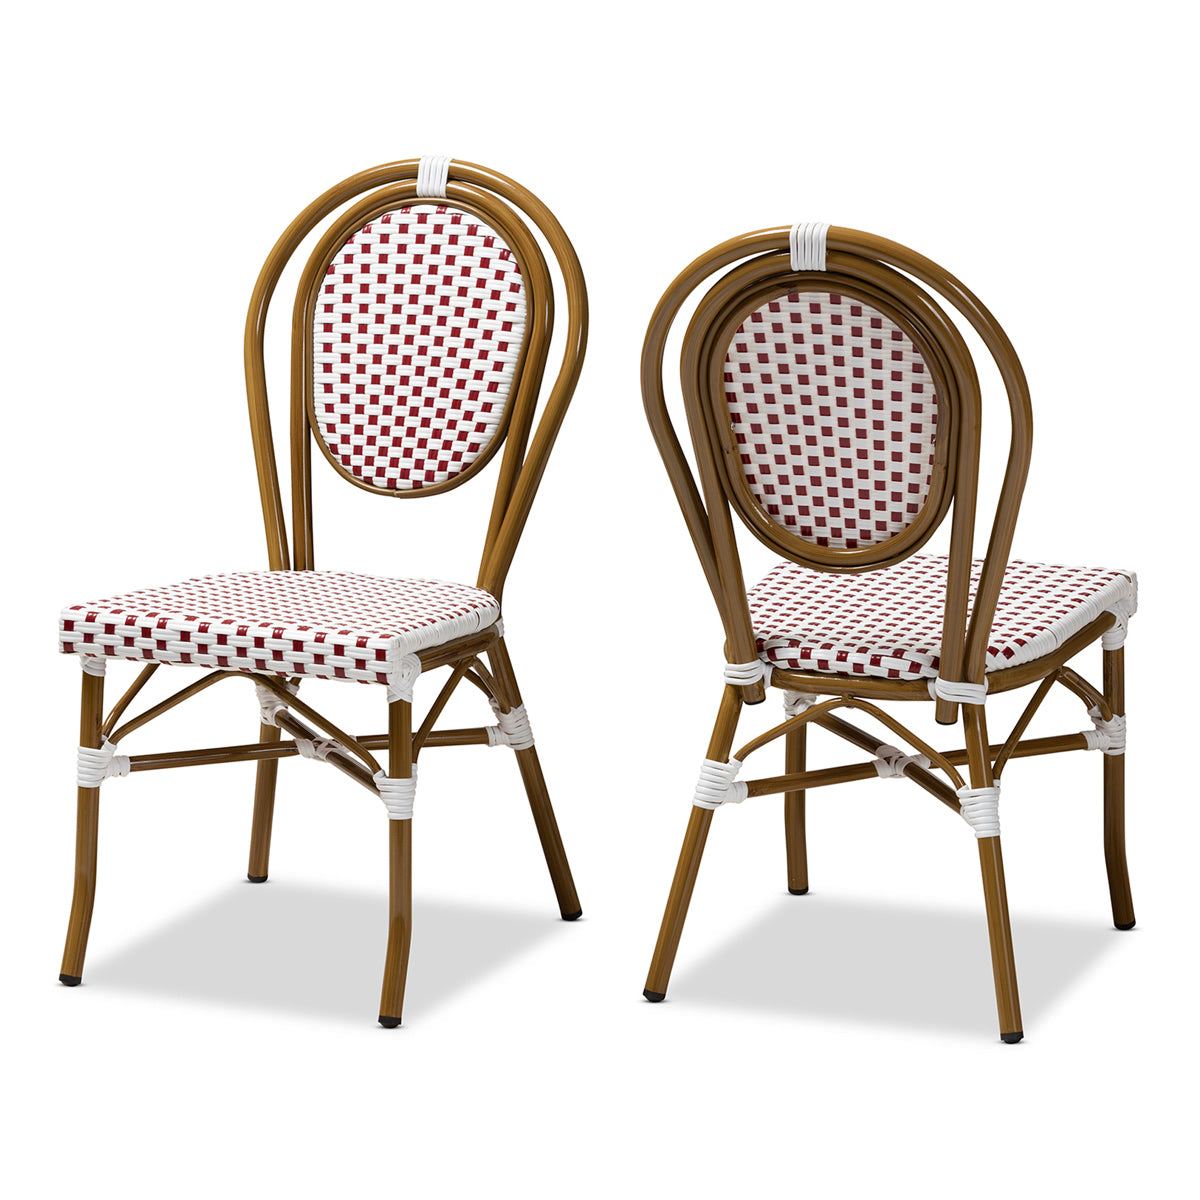 Baxton Studio Gauthier Classic French Indoor and Outdoor Red and White Bamboo Style Stackable Bistro Dining Chair Set of 2 Baxton Studio-dining chair-Minimal And Modern - 1